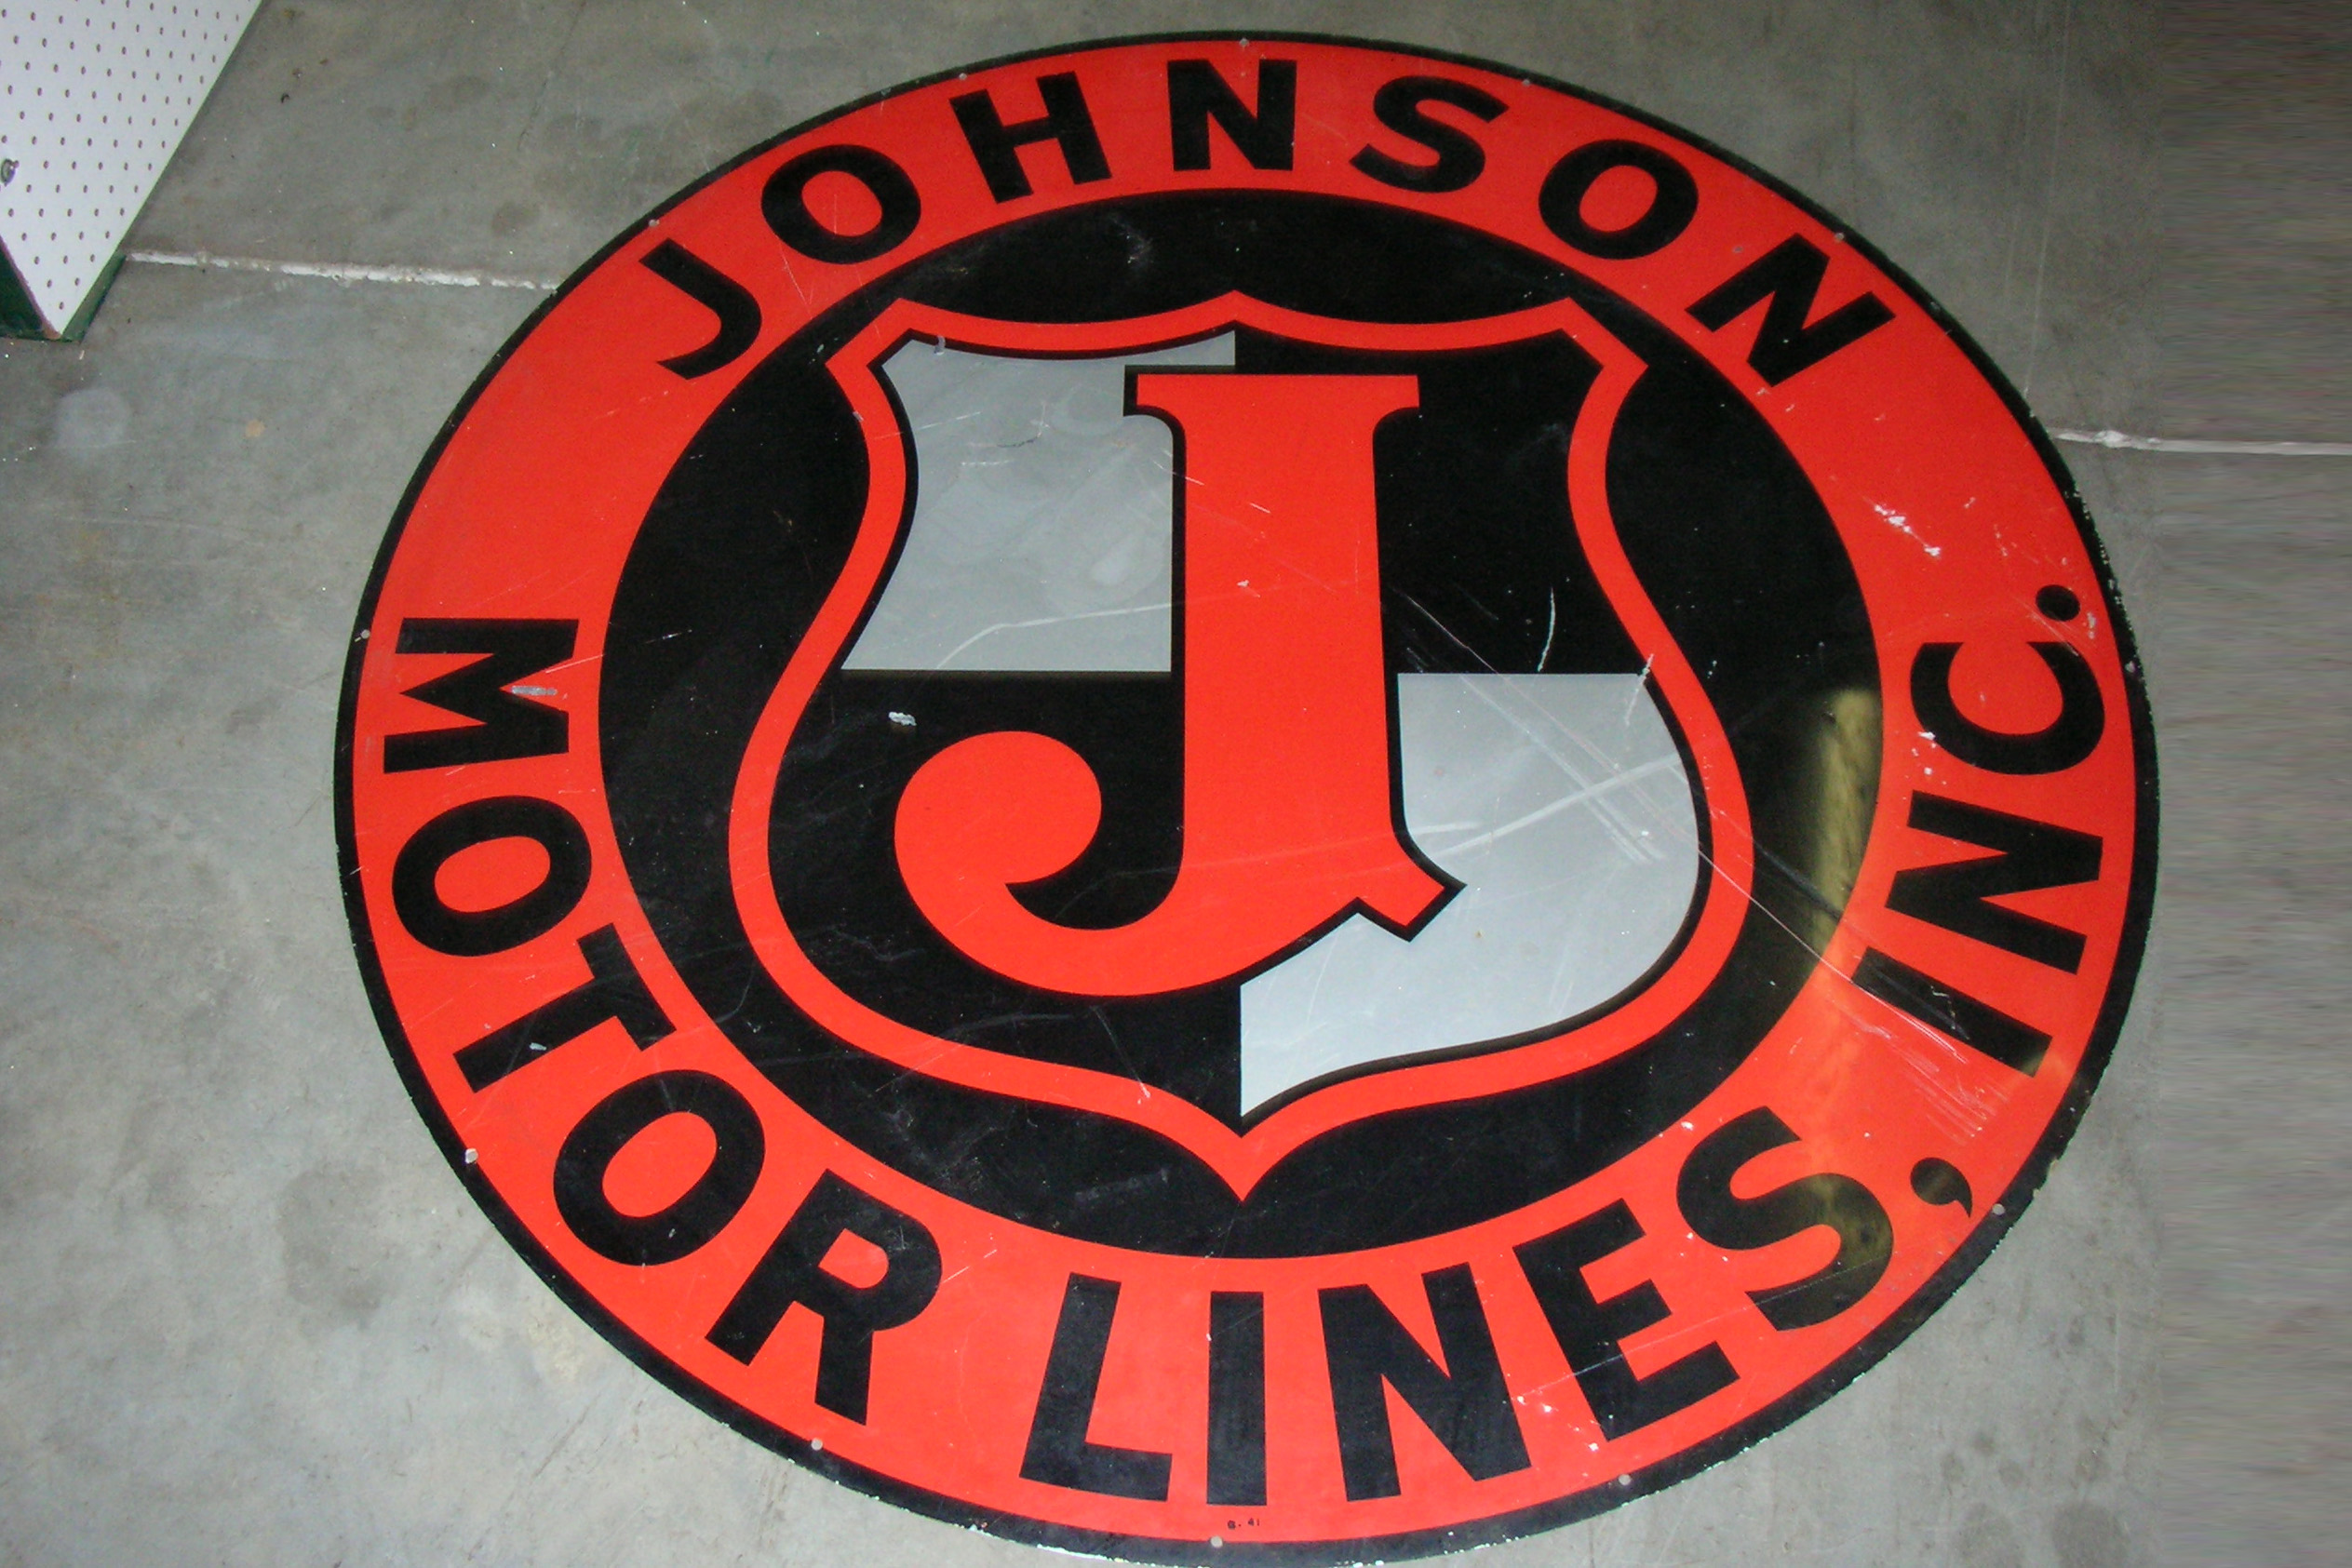 0th Image of a N/A JOHNSON MOTOR LINES ROUND SIGN